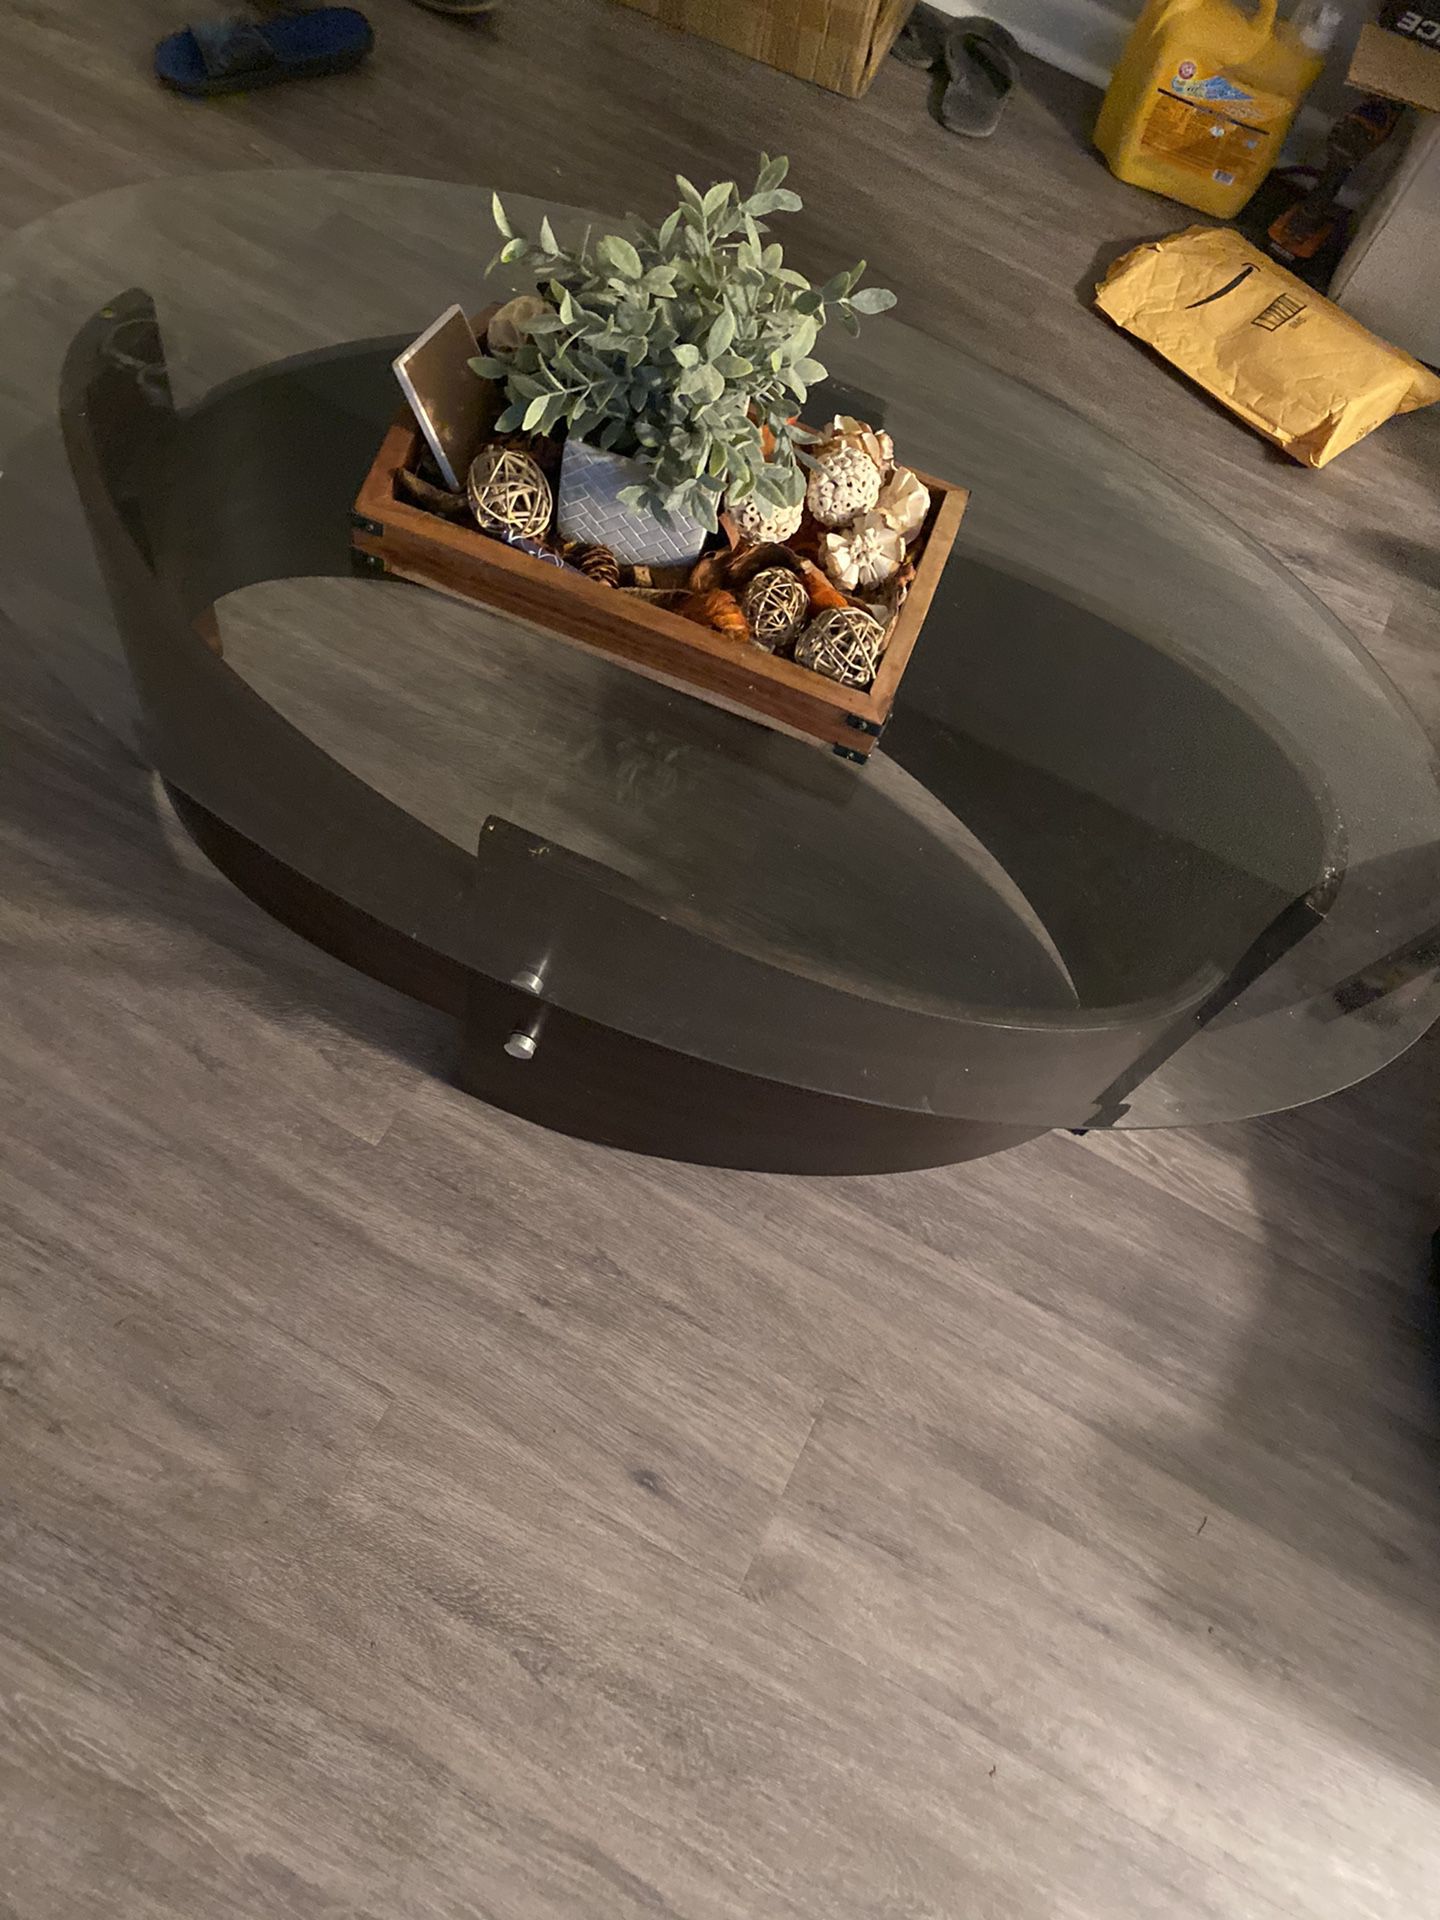 Coffe table with decoration